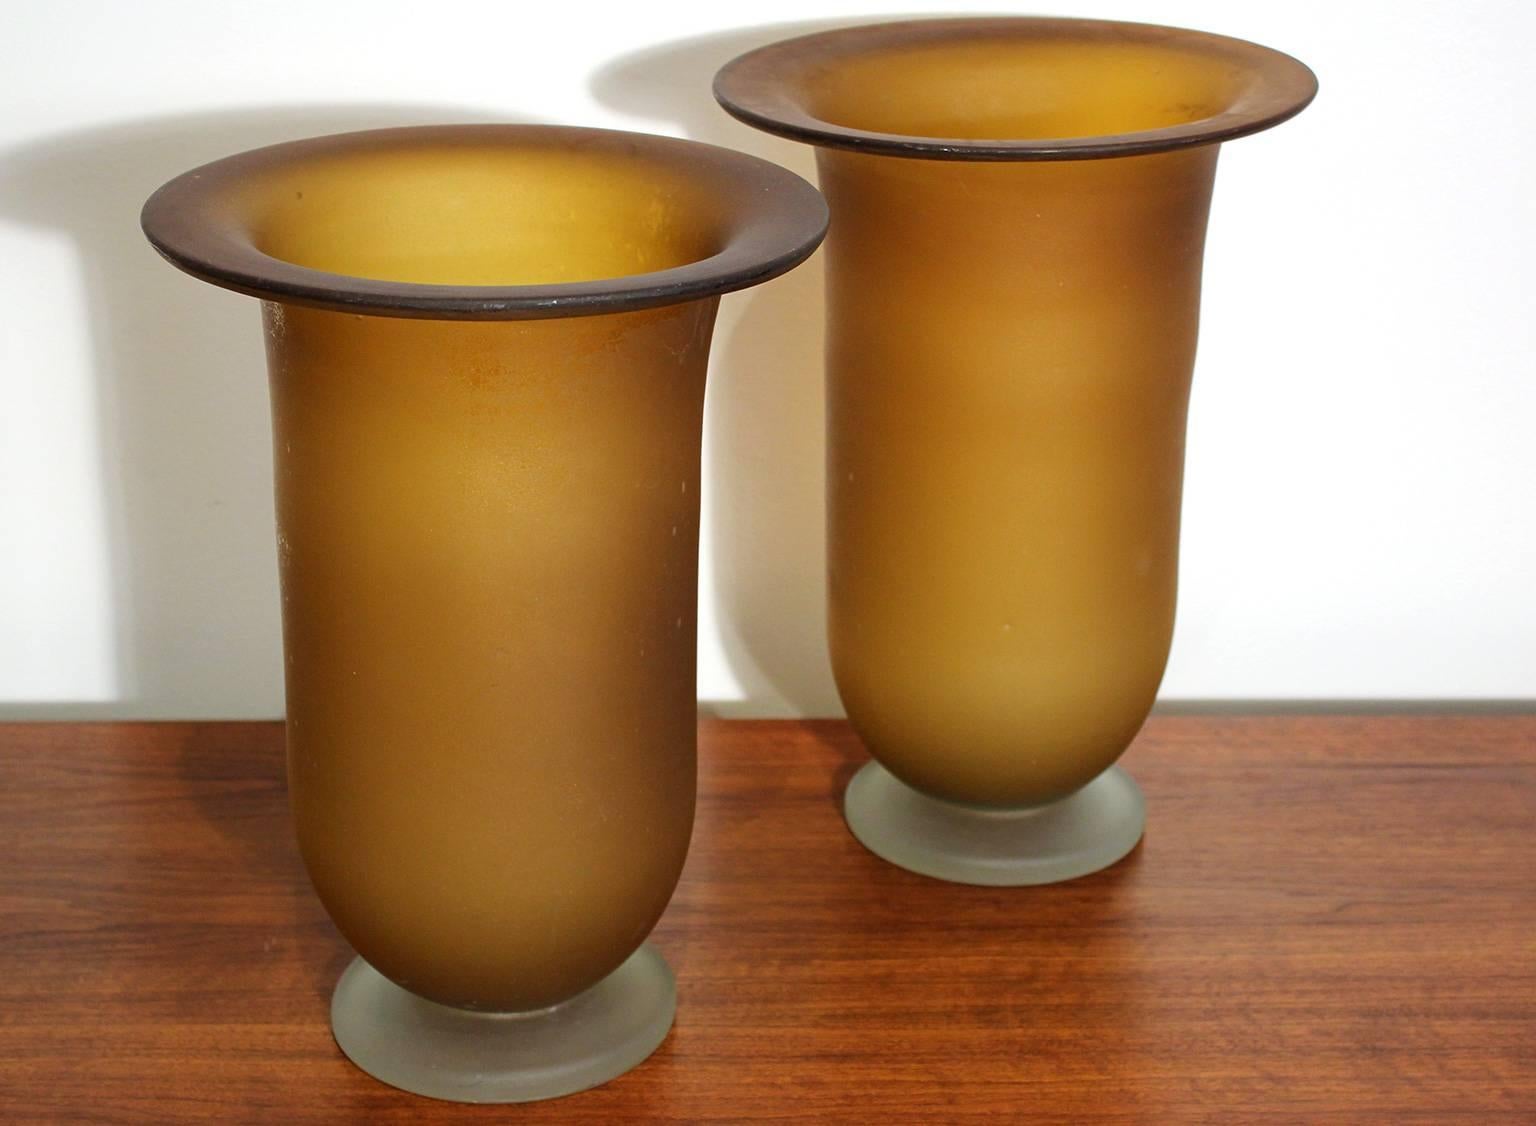 Large pair of Murano glass vases with wide flaring rim. Circa 1970s. Small imperfection on top edge as pictured. Appears to be a manufacturing flaw from when the glass was made and original to the vase. In excellent vintage condition. One vase is